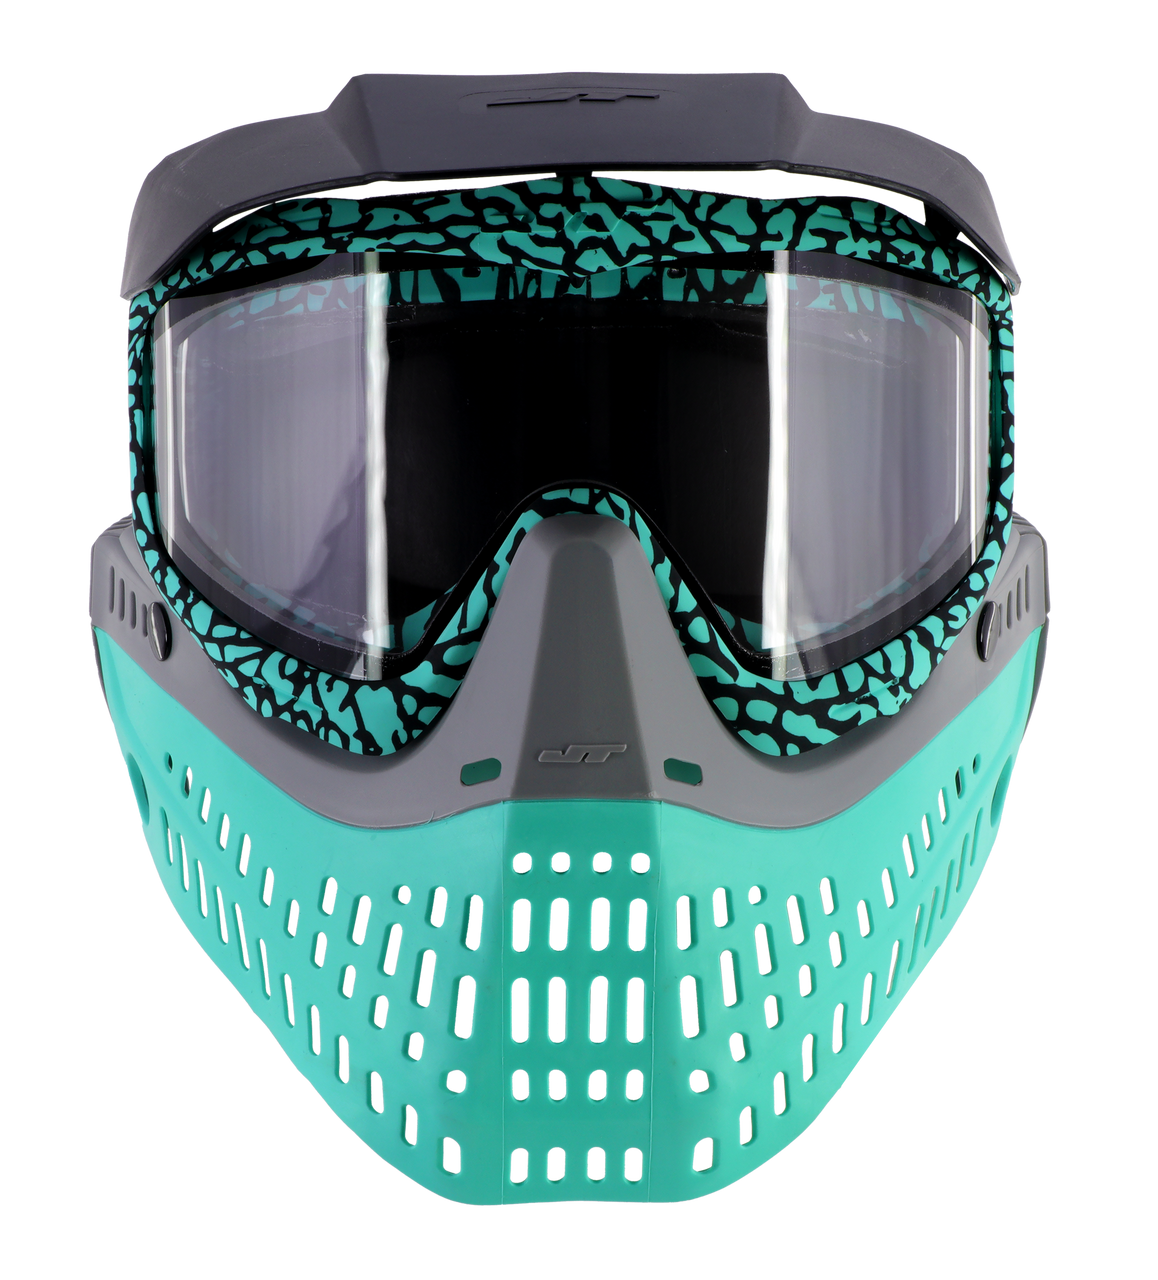 JT Spectra Proflex SE mask, olive/brown w/thermal lens - Airsoft